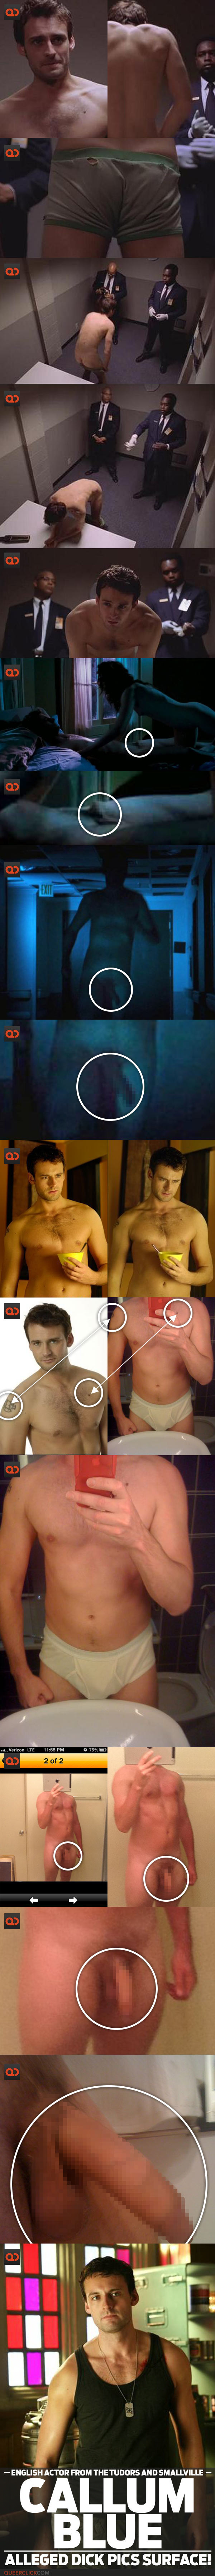 Callum Blue, English Actor From The Tudors And Smallville, Alleged Dick Pics Surface!